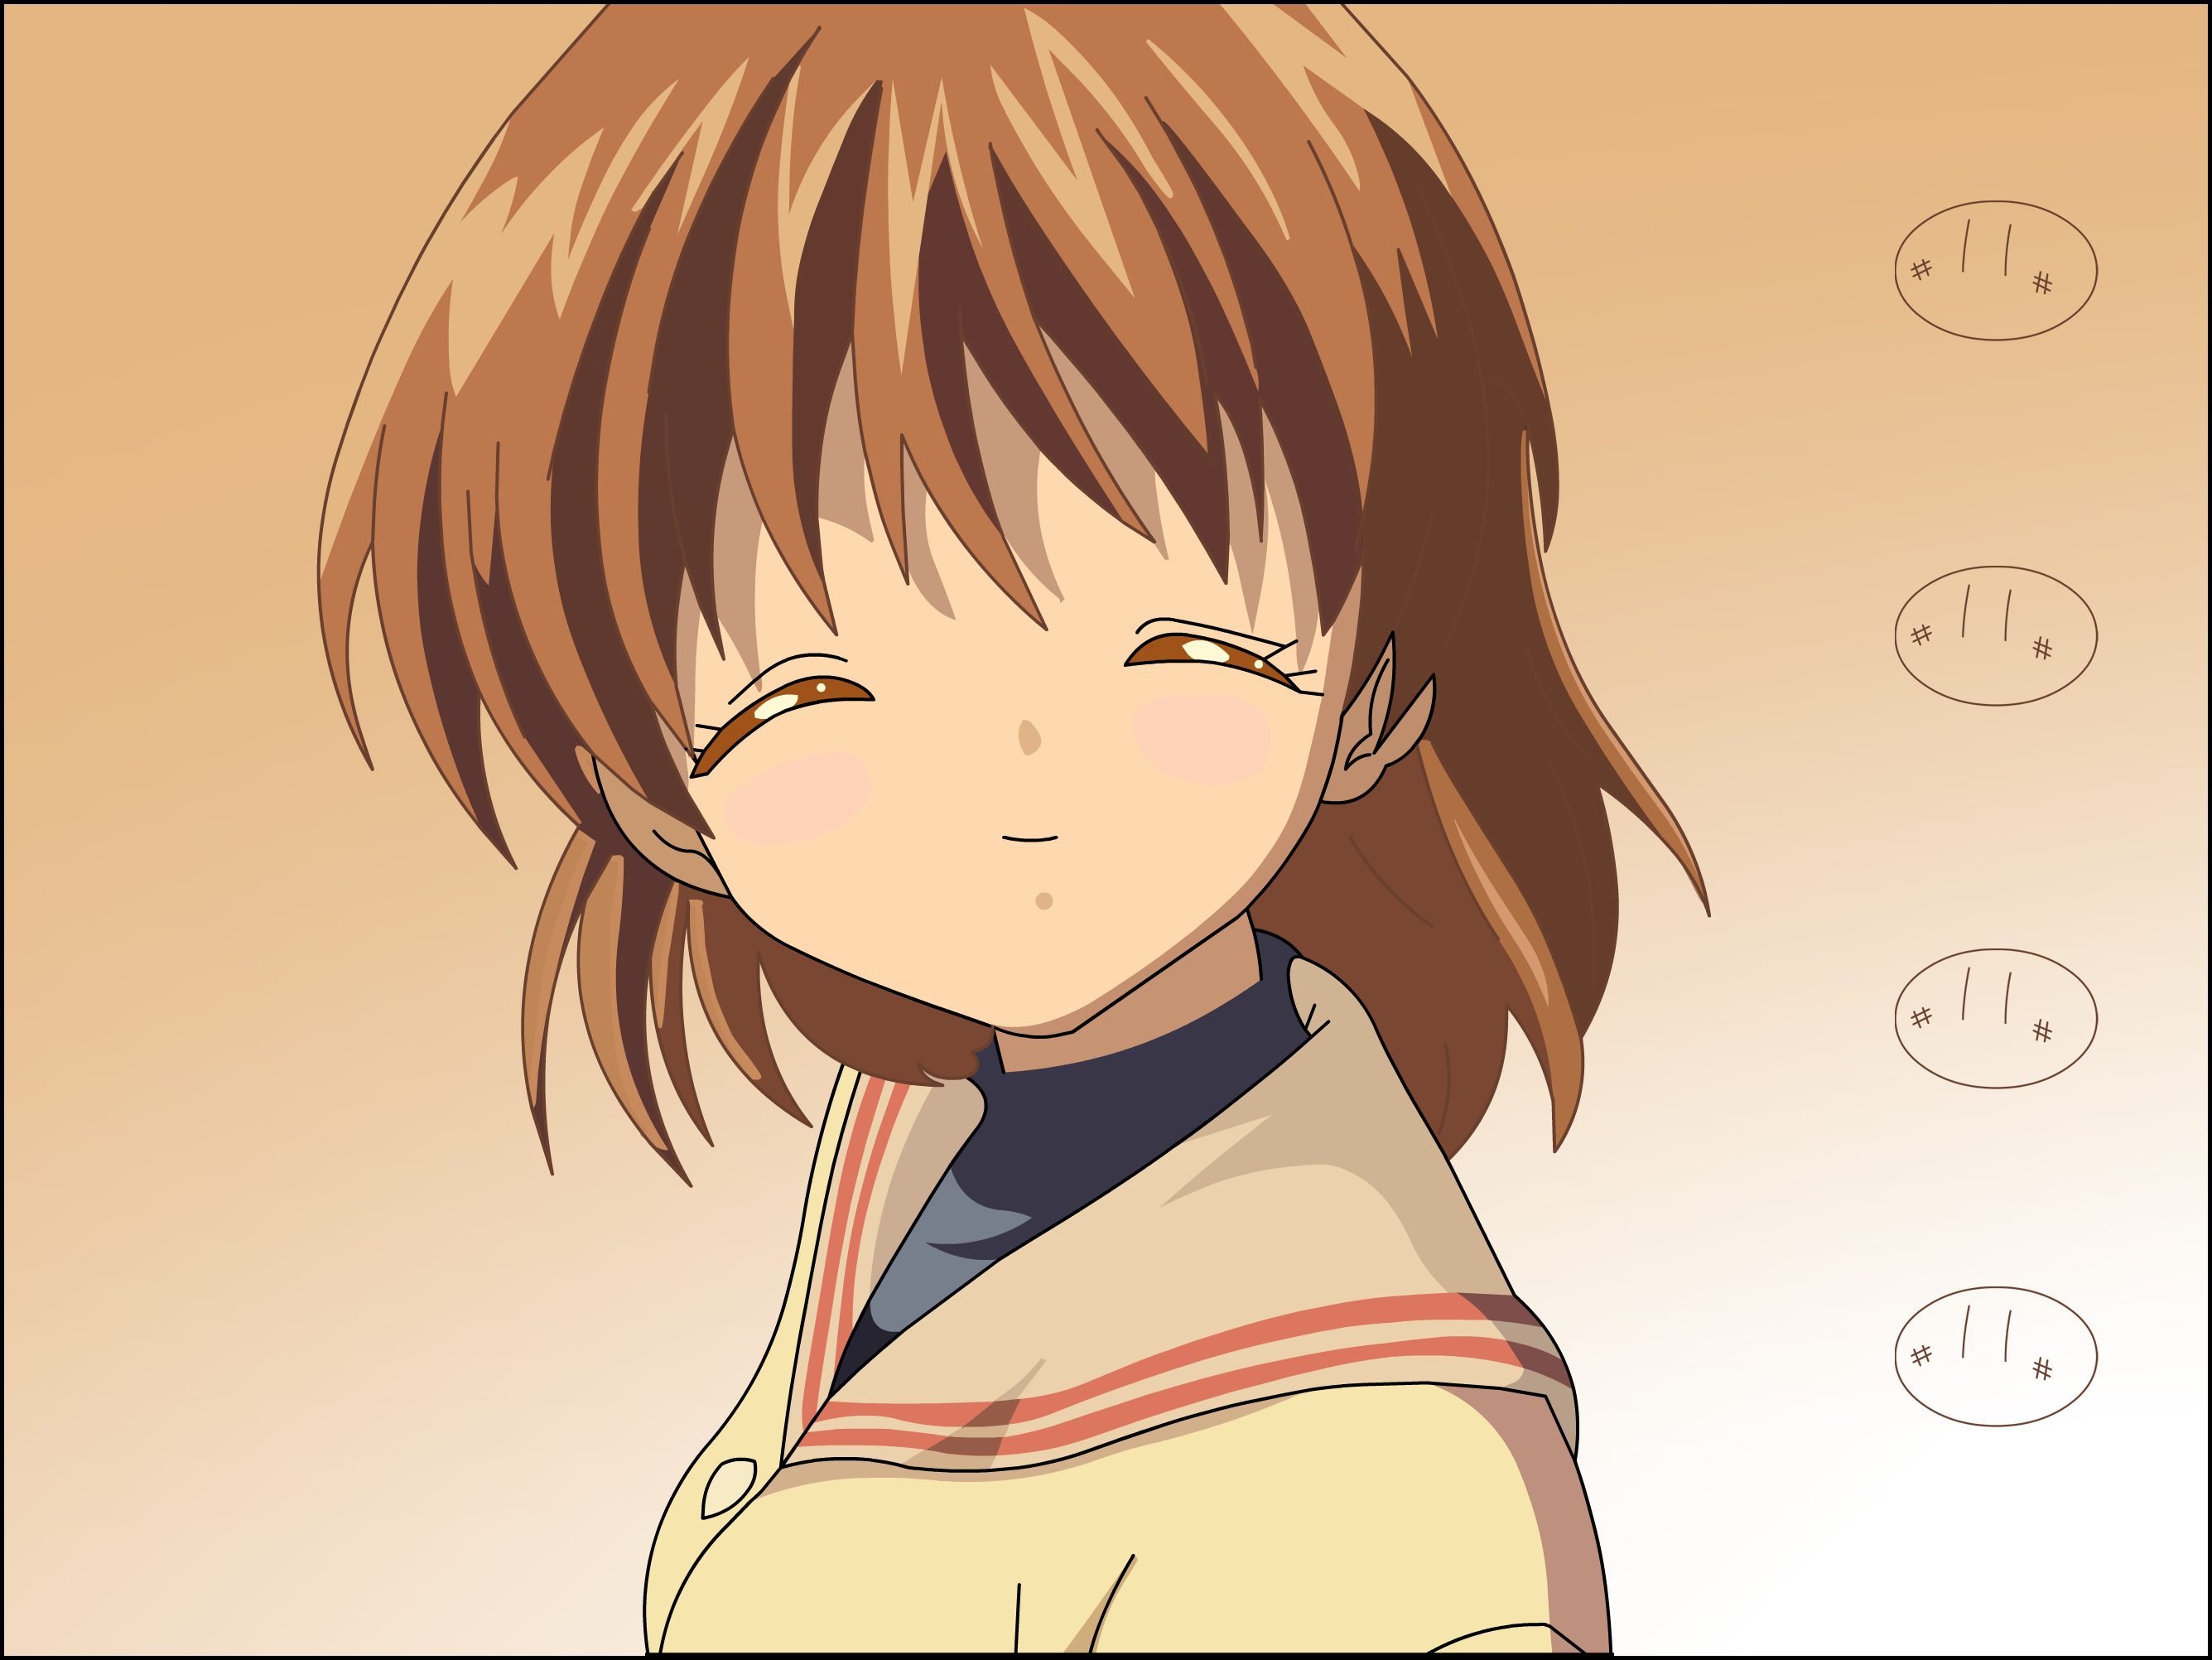 Clannad, is it REALLY that sad? Answers inside! - News in Japan